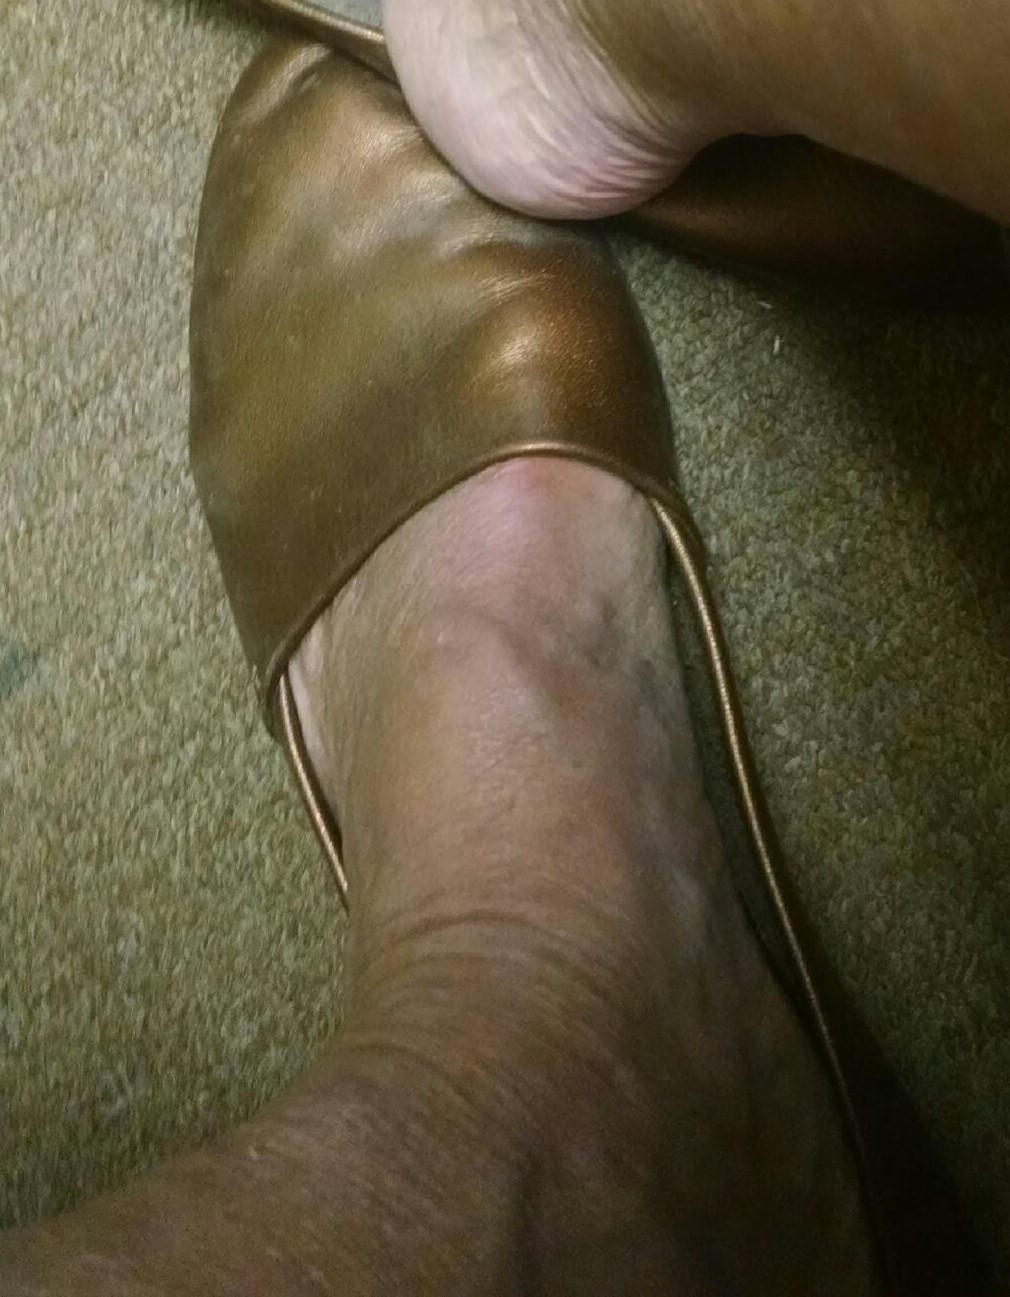 mature foot shoe fetish On Yuvutu Homemade Amateur Porn Movies And XXX Sex Videos